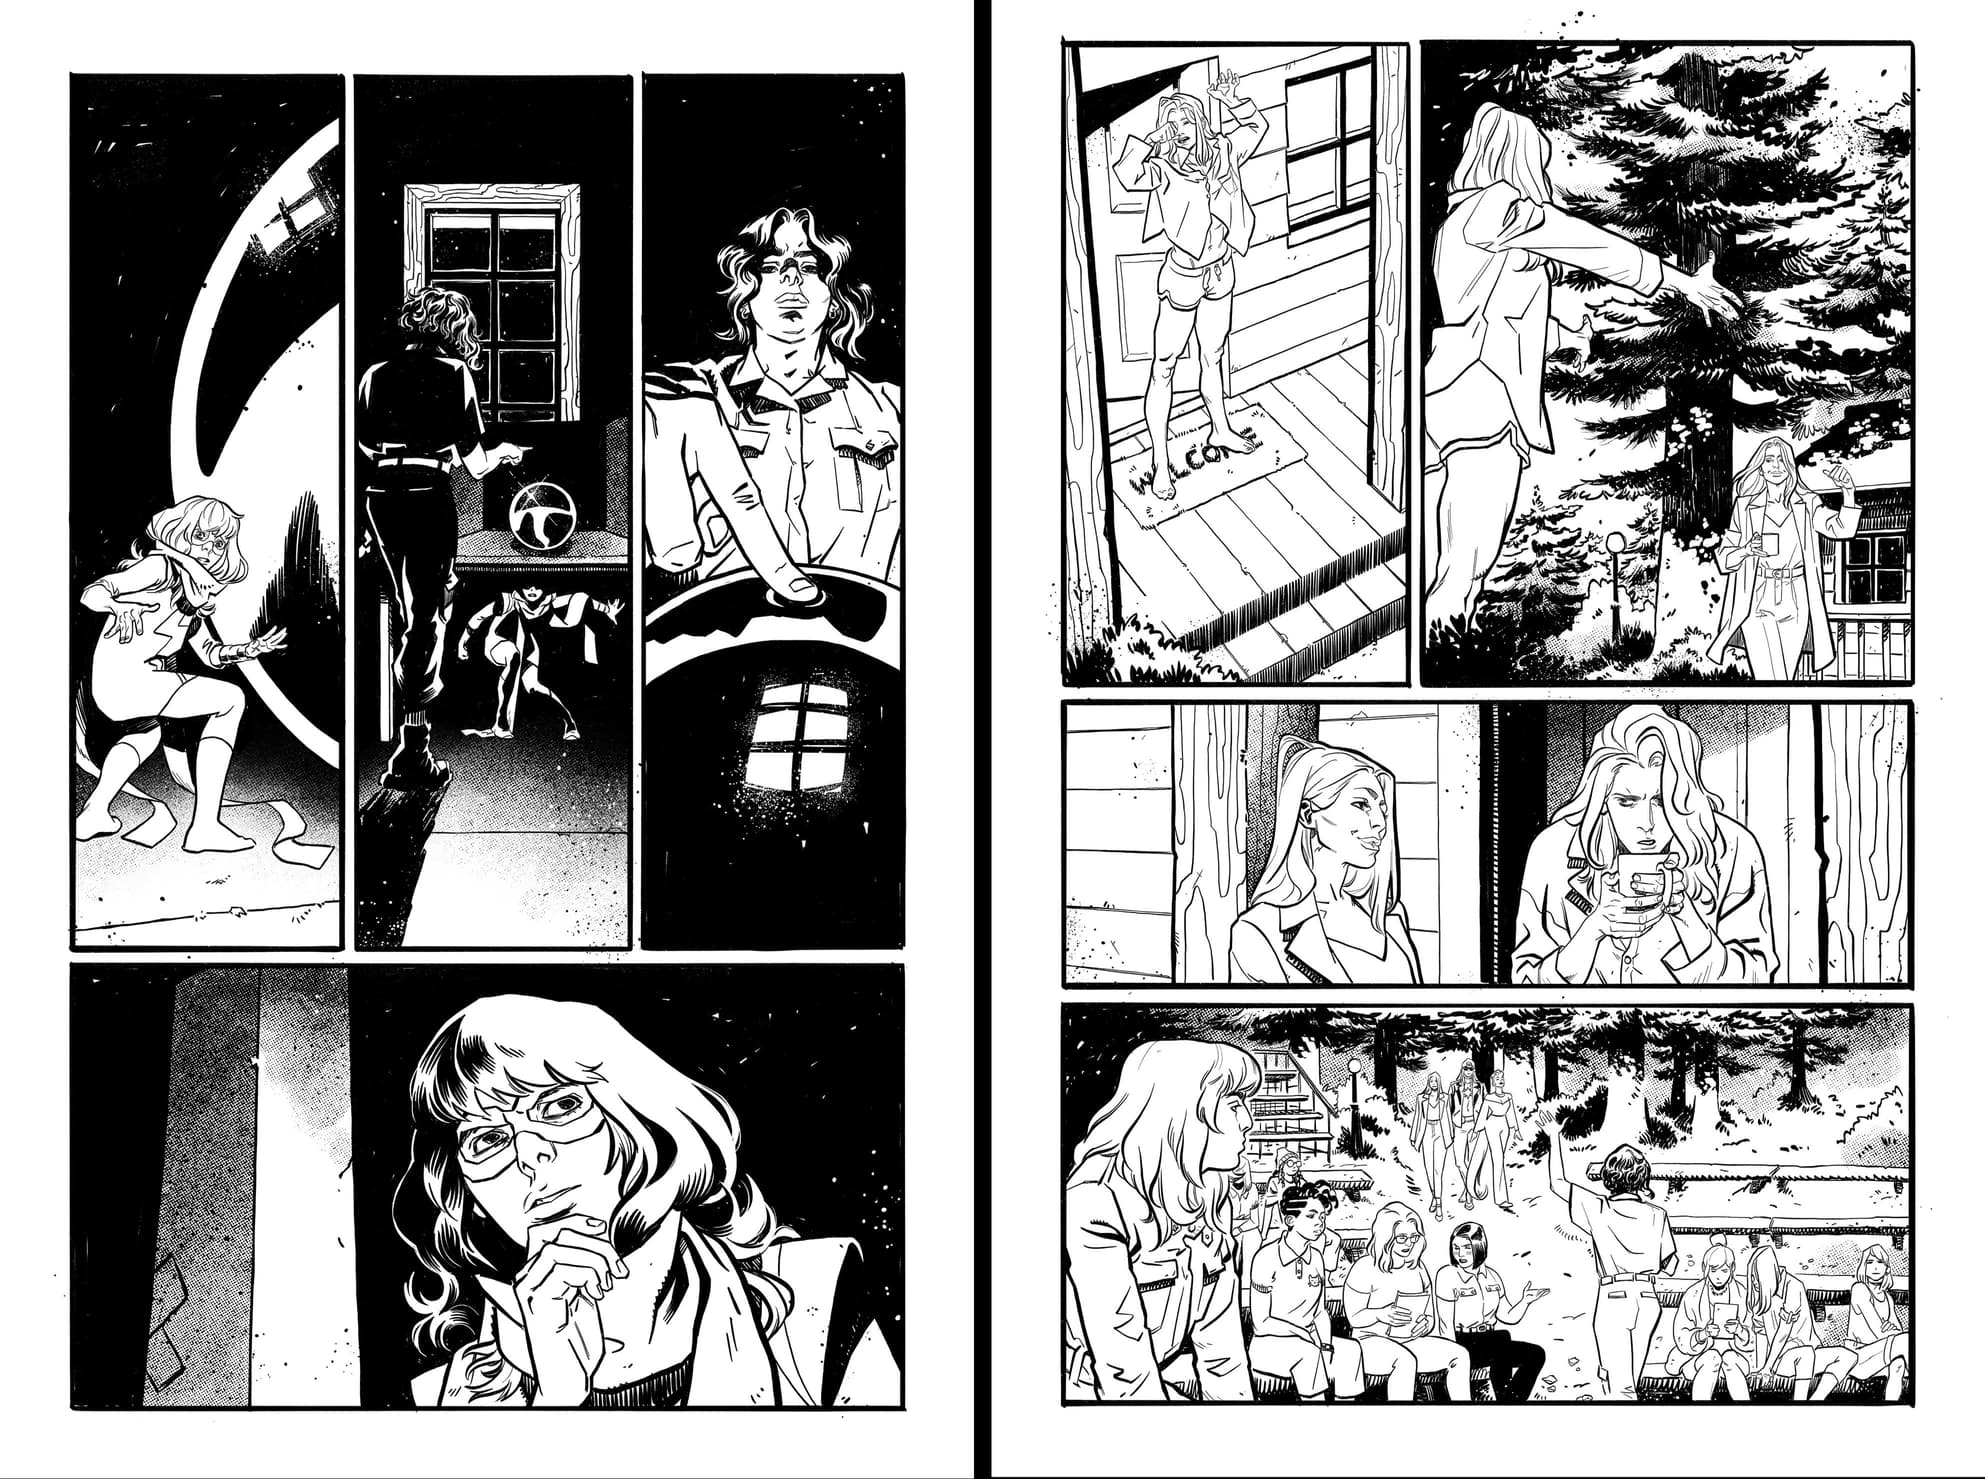 Fearless #3 inks by Claire Roe